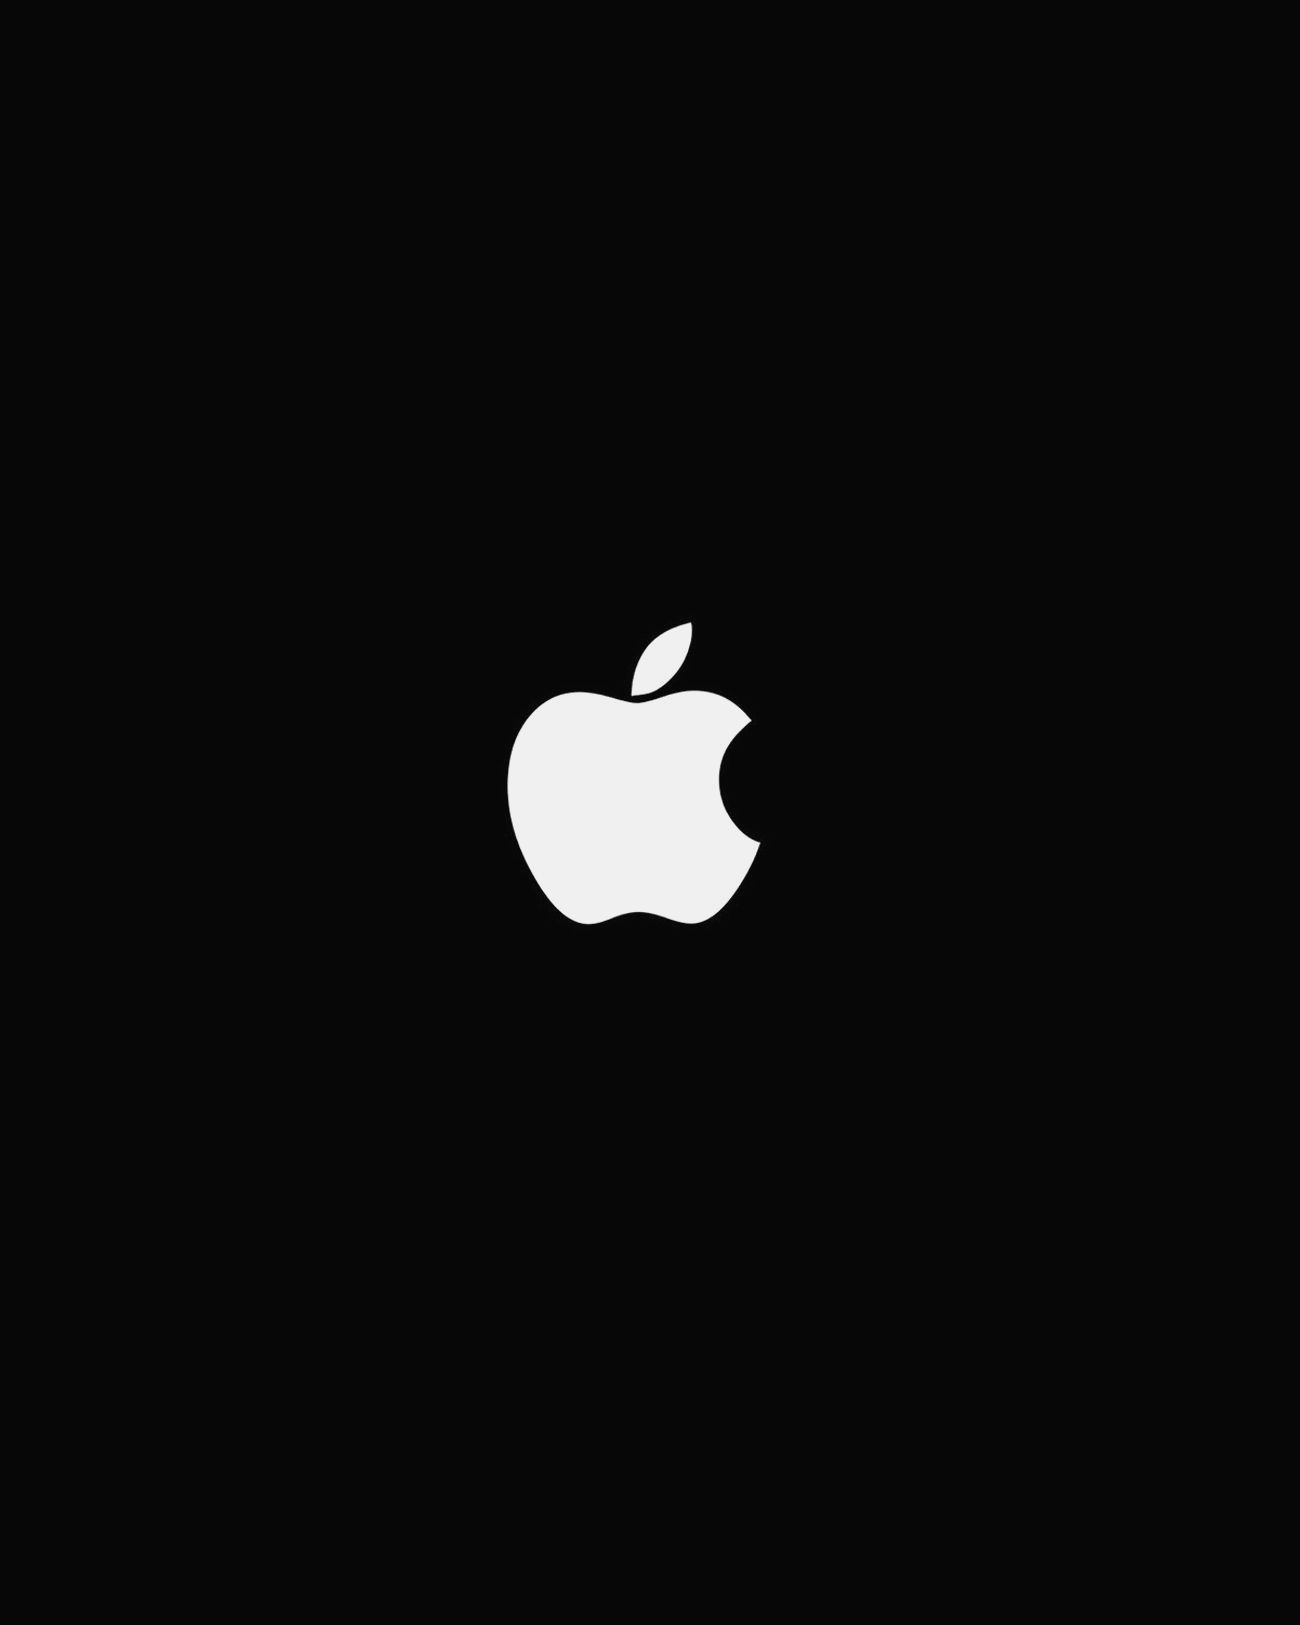 Apple Watch Face Wallpapers - Wallpaper Cave